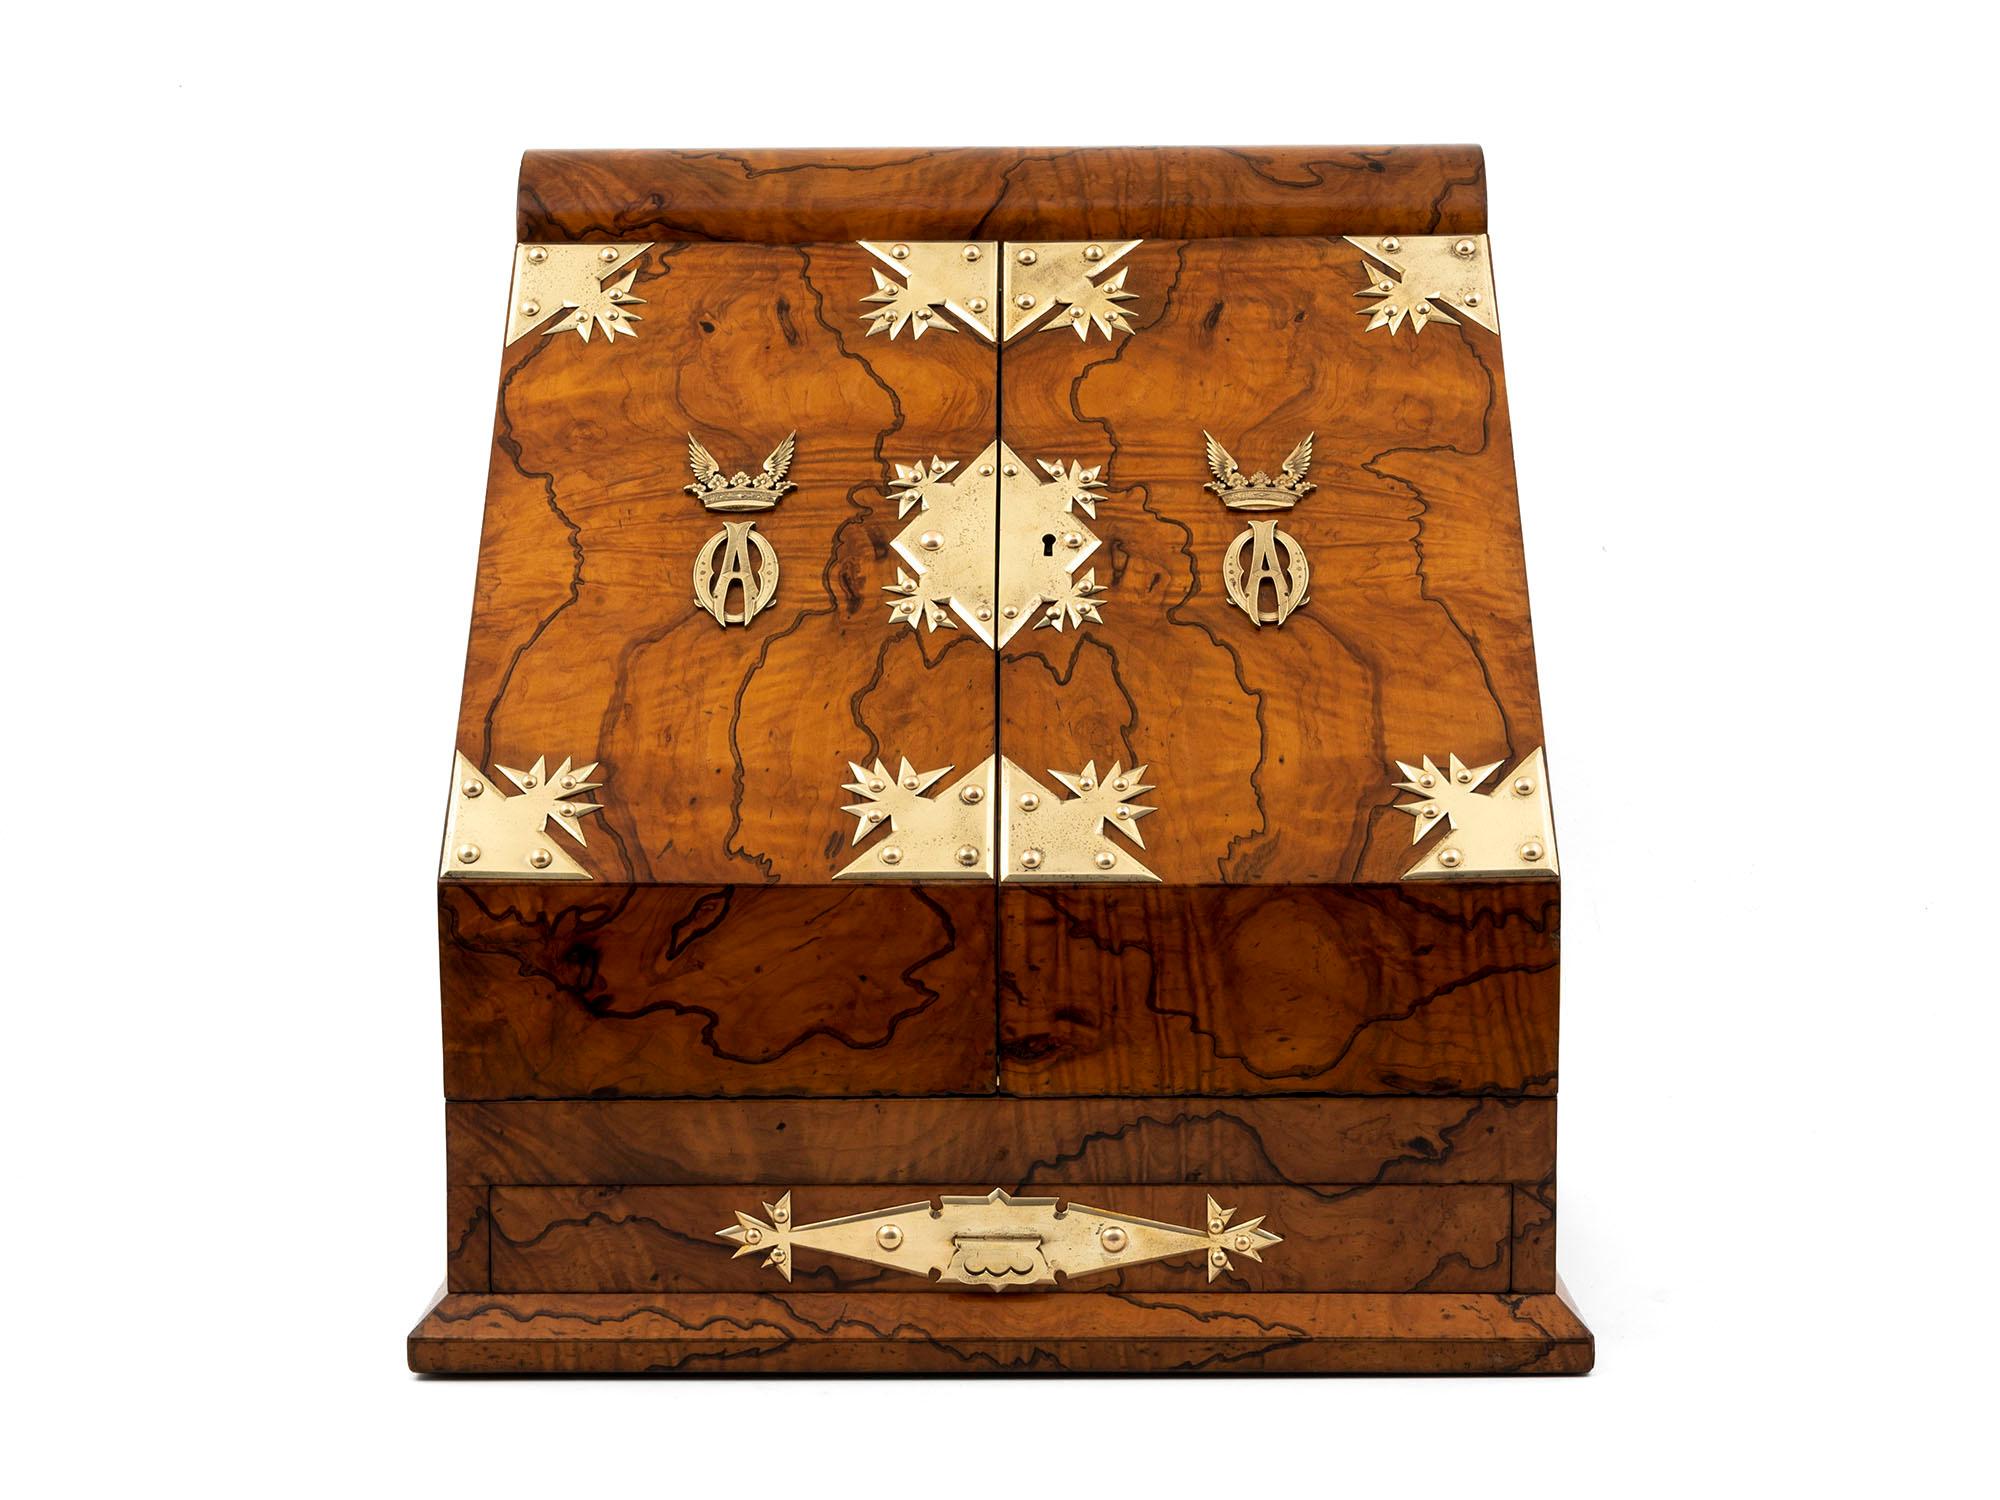 Unique large Stationery Box by Betjemann and retailed by Leuchars, with a Duke's Coronet.

This wonderful stationery box is veneered in feathered Olivewood, ornate brass mounts, and wonderfully made large carry handles. With a winged Duke's crown